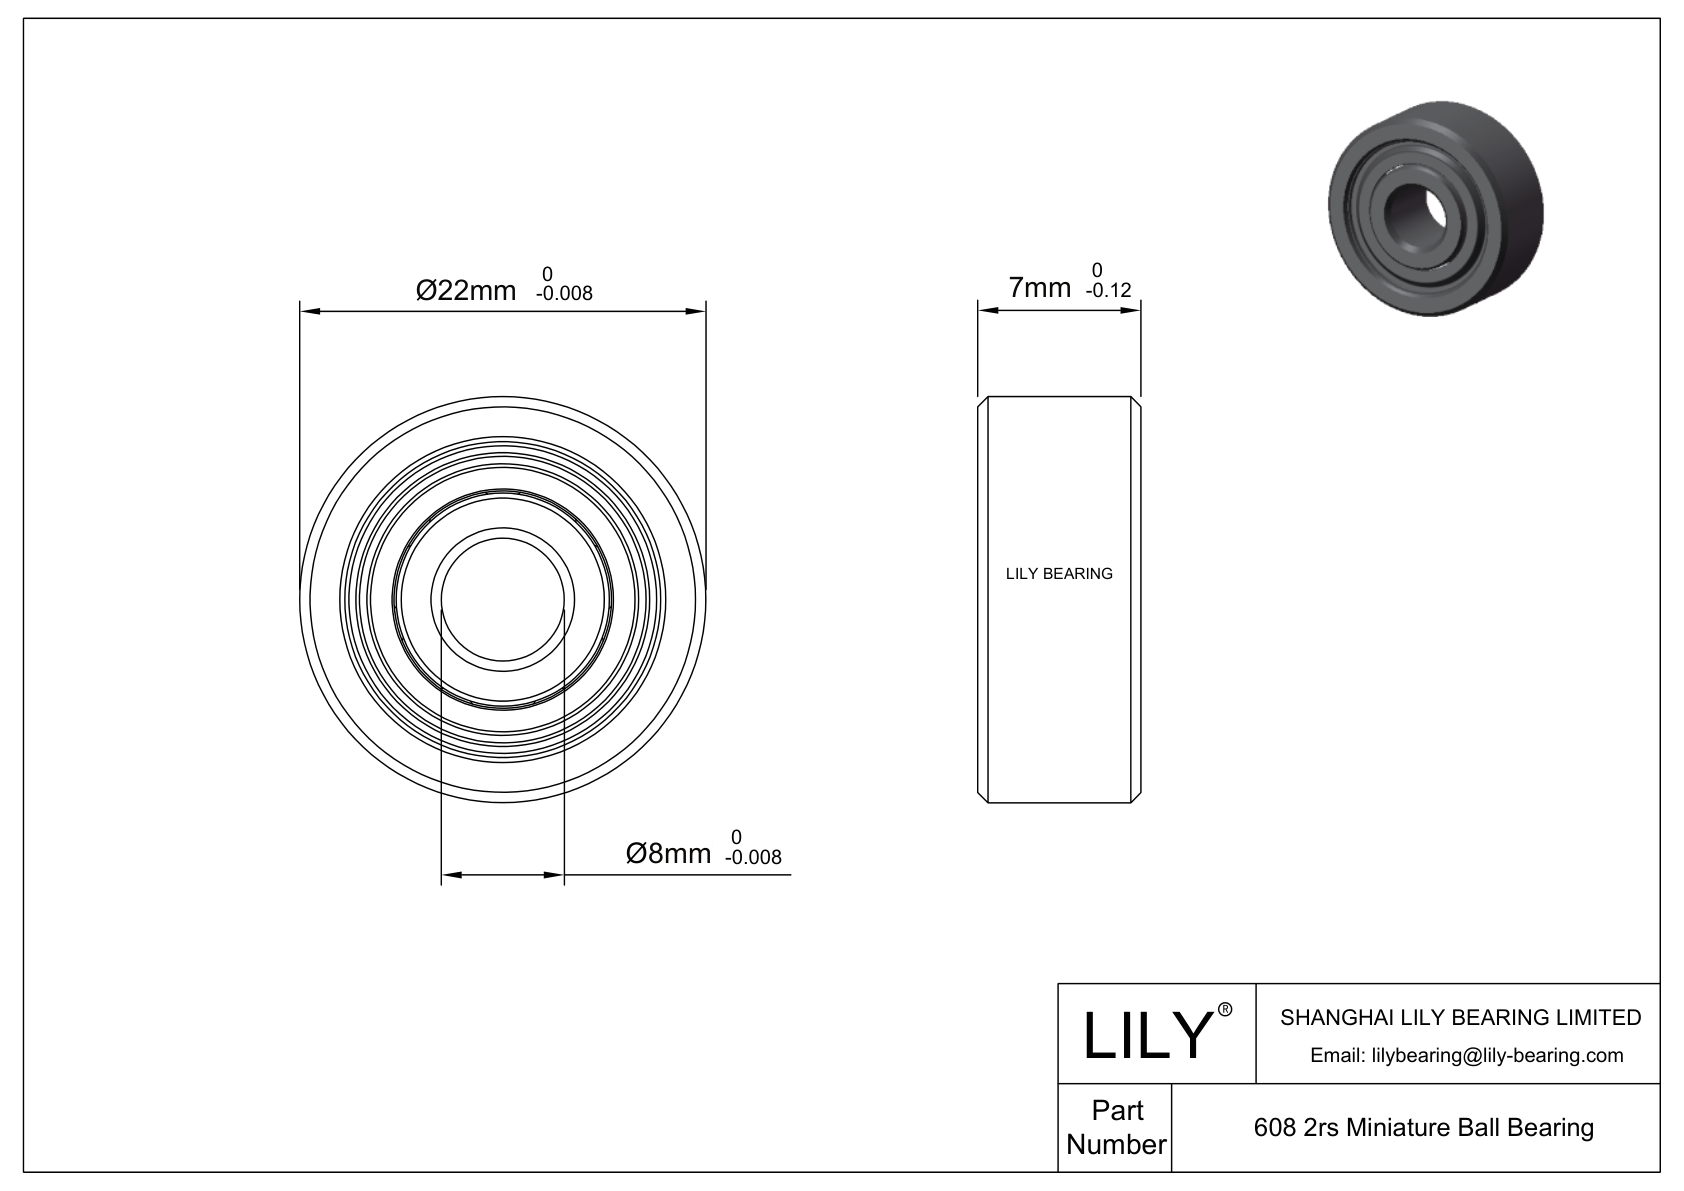 LILY-BS60830-7 POM Coated Bearing cad drawing